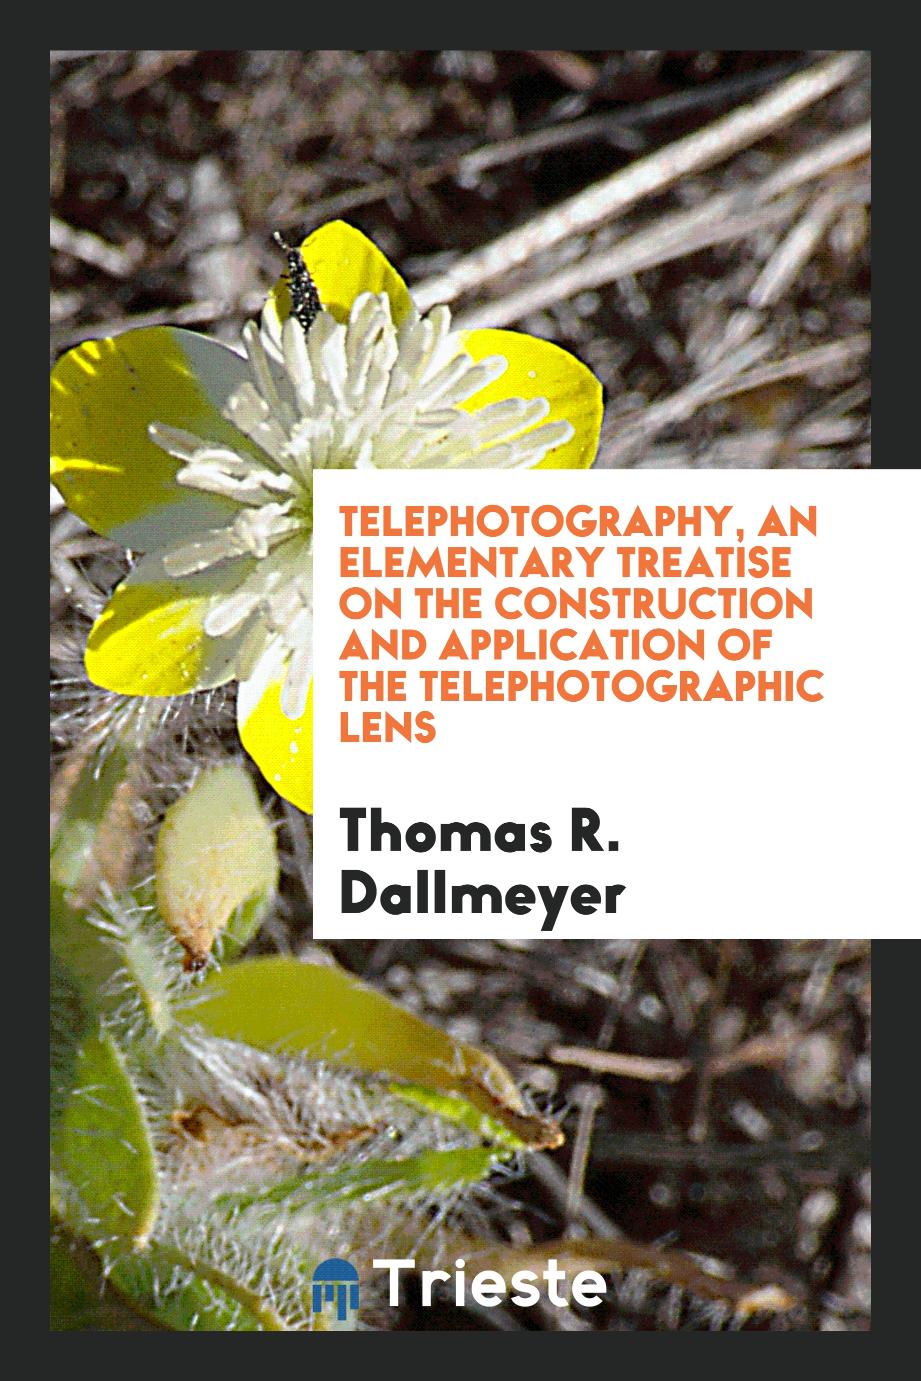 Telephotography, an elementary treatise on the construction and application of the telephotographic lens